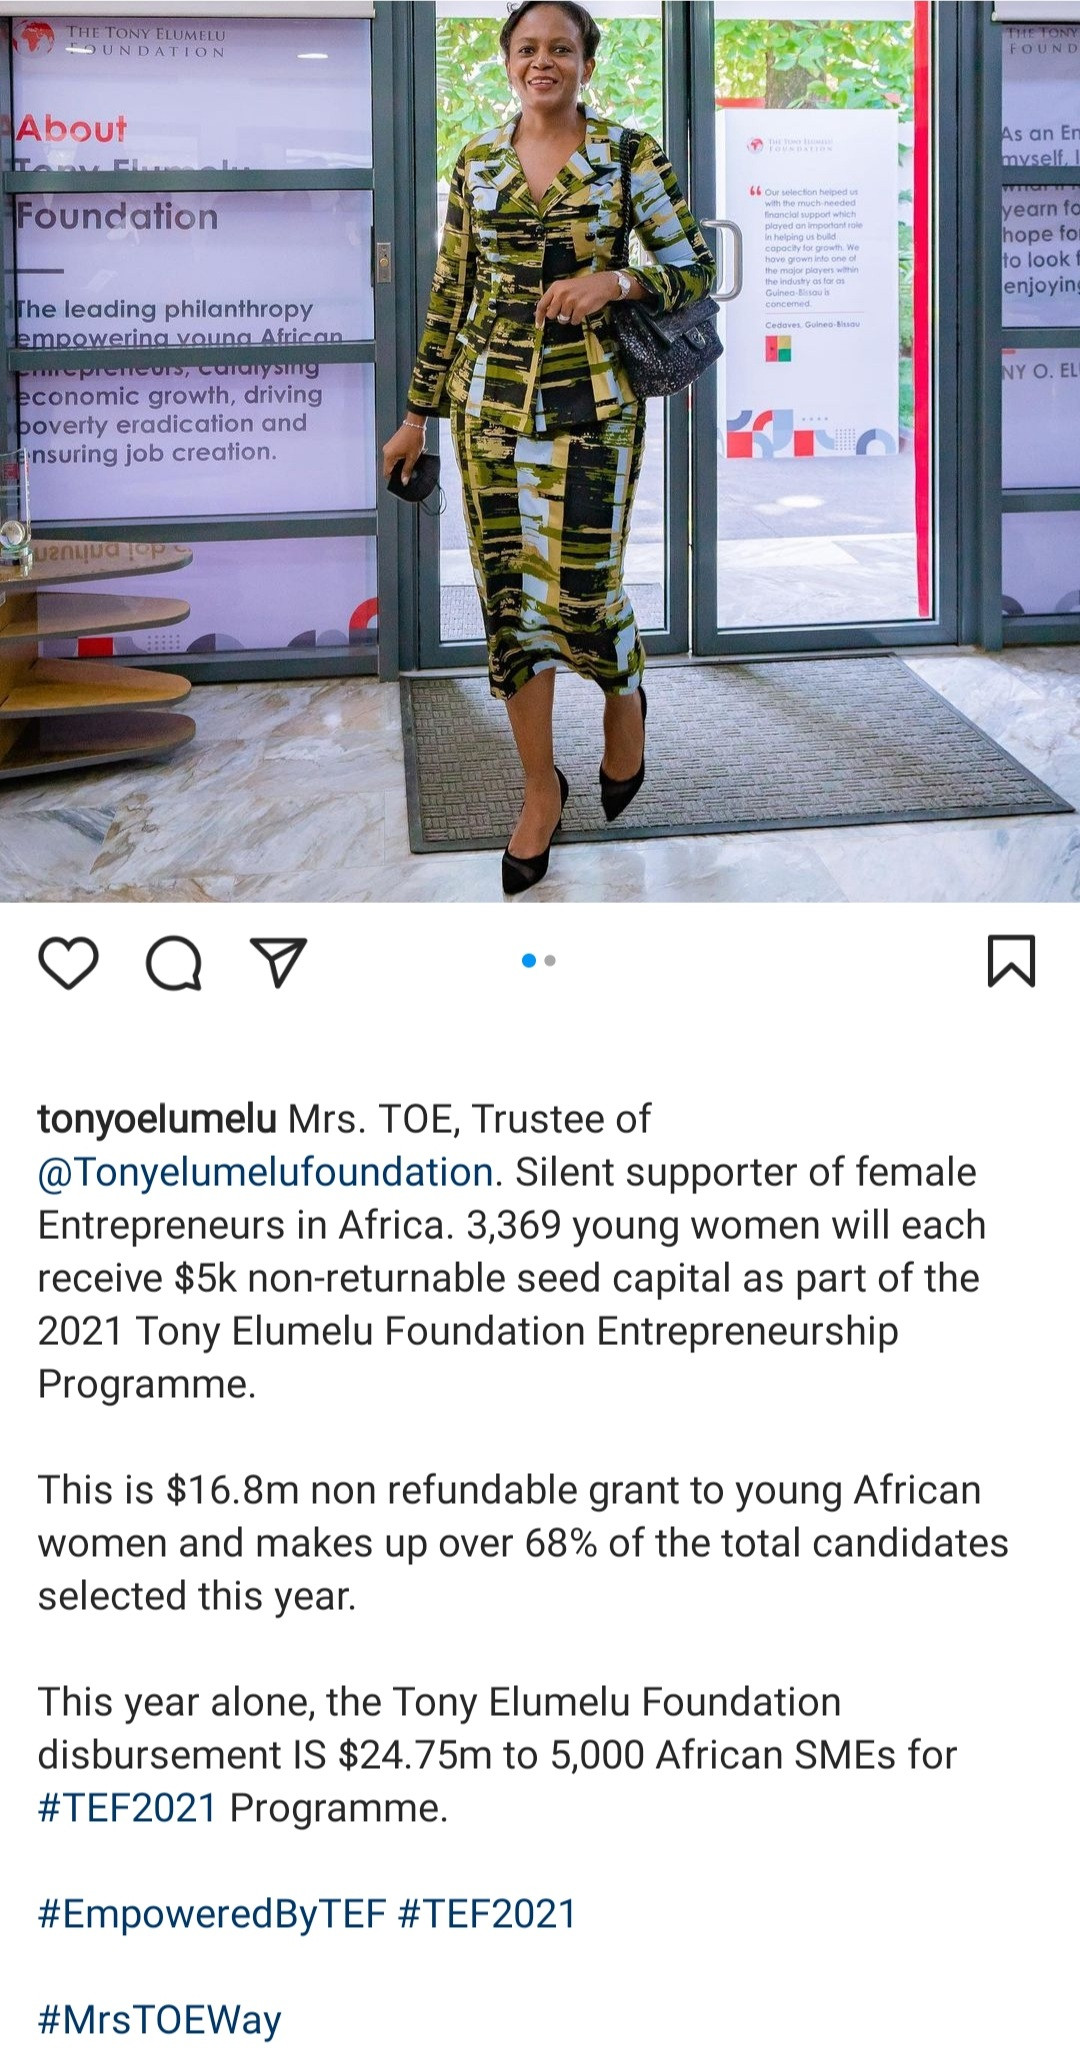 Nigerian woman, Awele Elumelu Gives out $5,000 each seed non-returnable capital to 3,369 young women